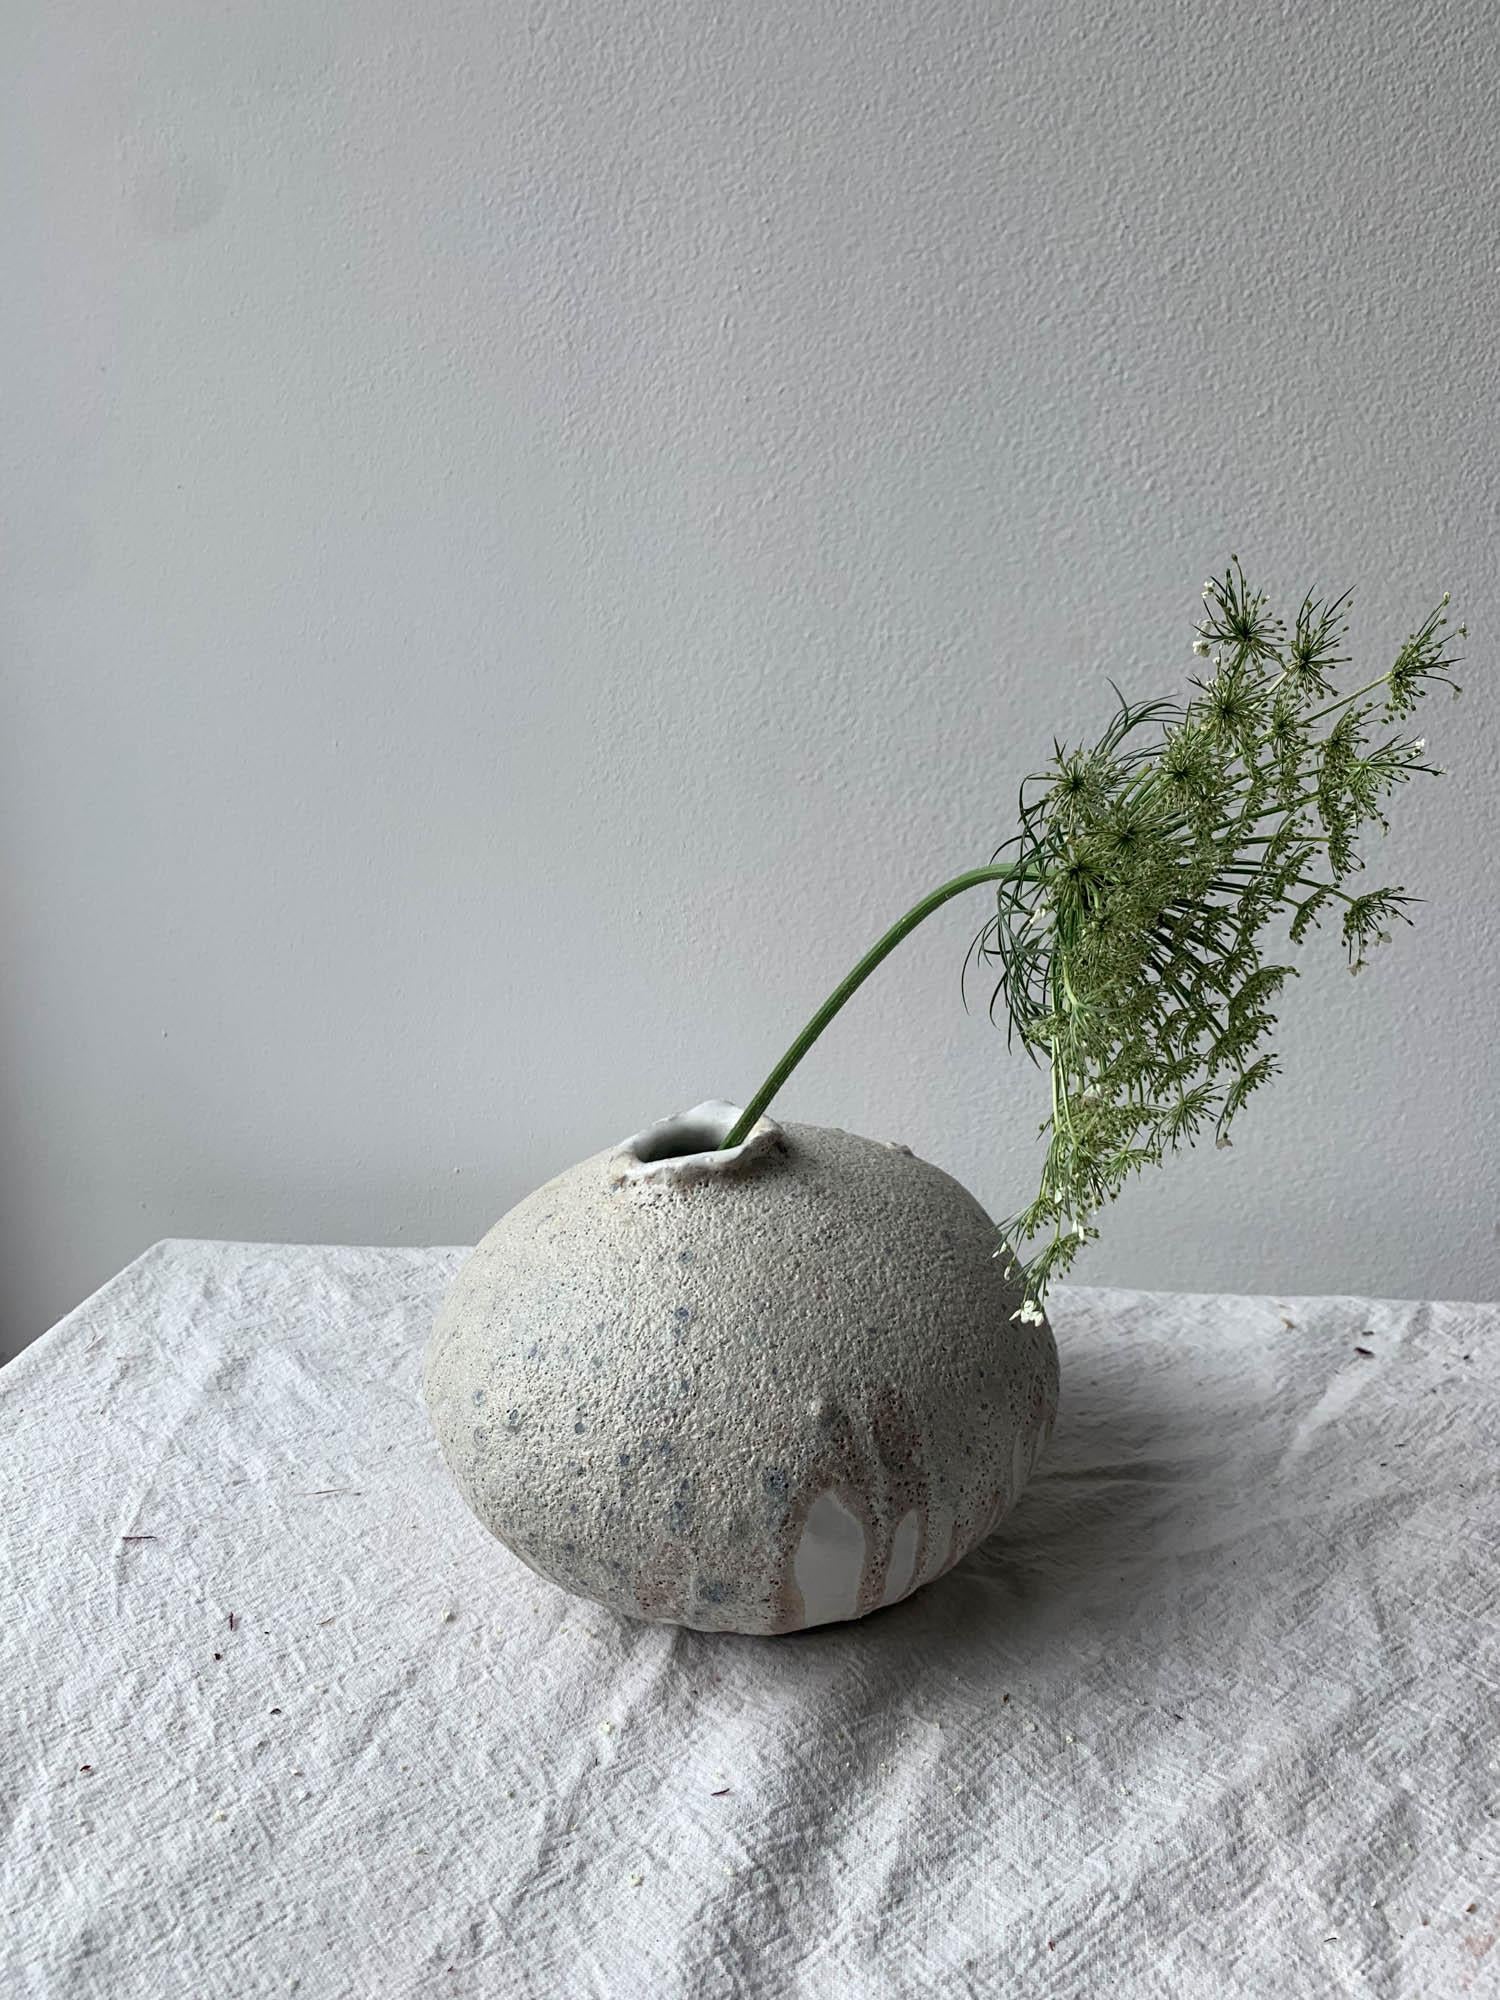 Handbuilt organic modern moon vase made from a groggy clay body covered layers of glossy and matte white glaze, and a heavily textured lava glaze. Each vase is made by hand in our Brooklyn studio, and no two are ever exactly alike. The moon vase is